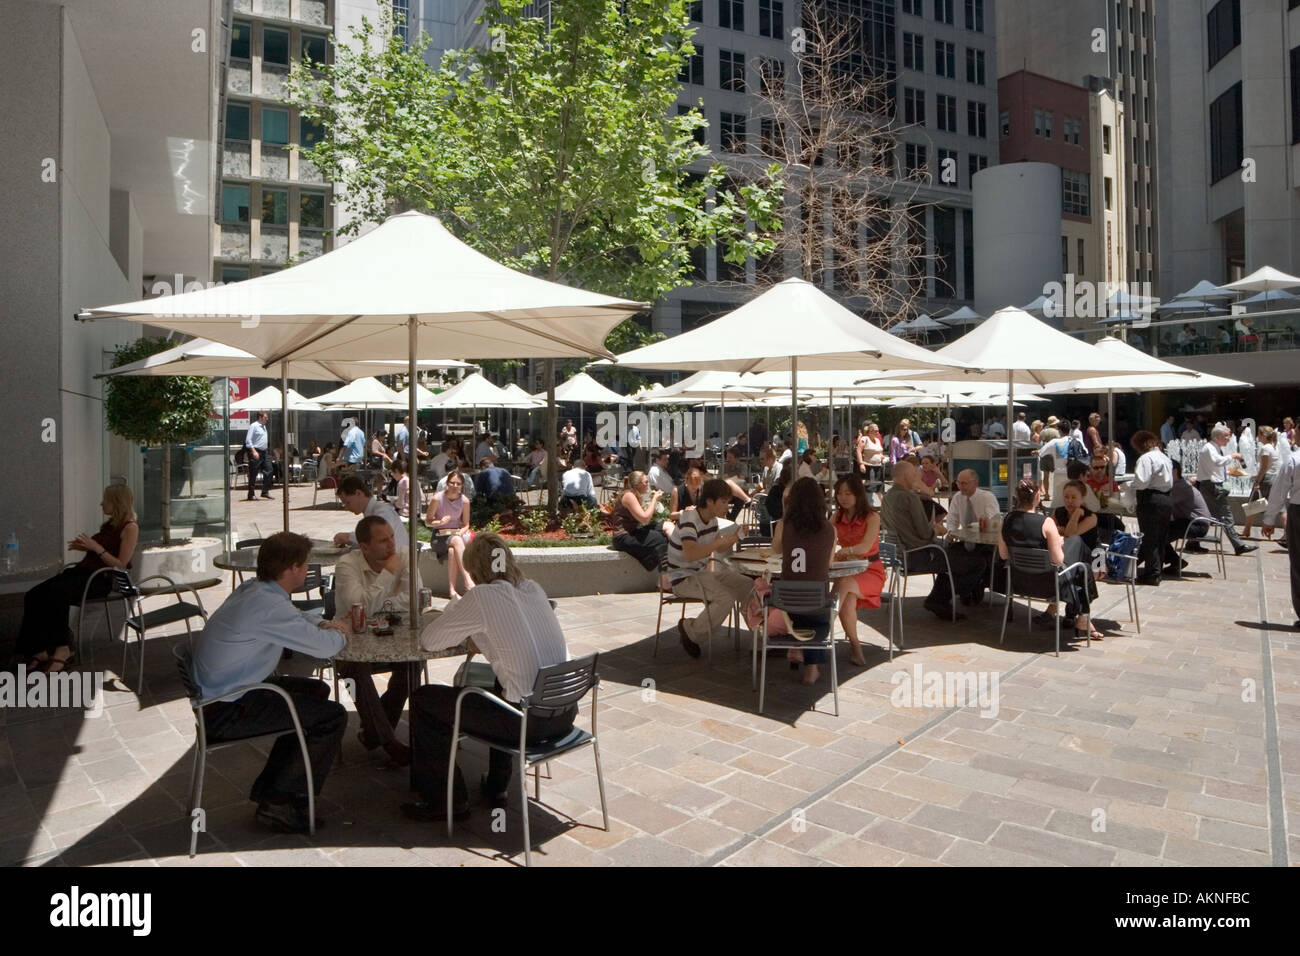 Workers lunching at open air cafes, Australia Square, Pitt Street, Sydney, New South Wales, Australia Stock Photo